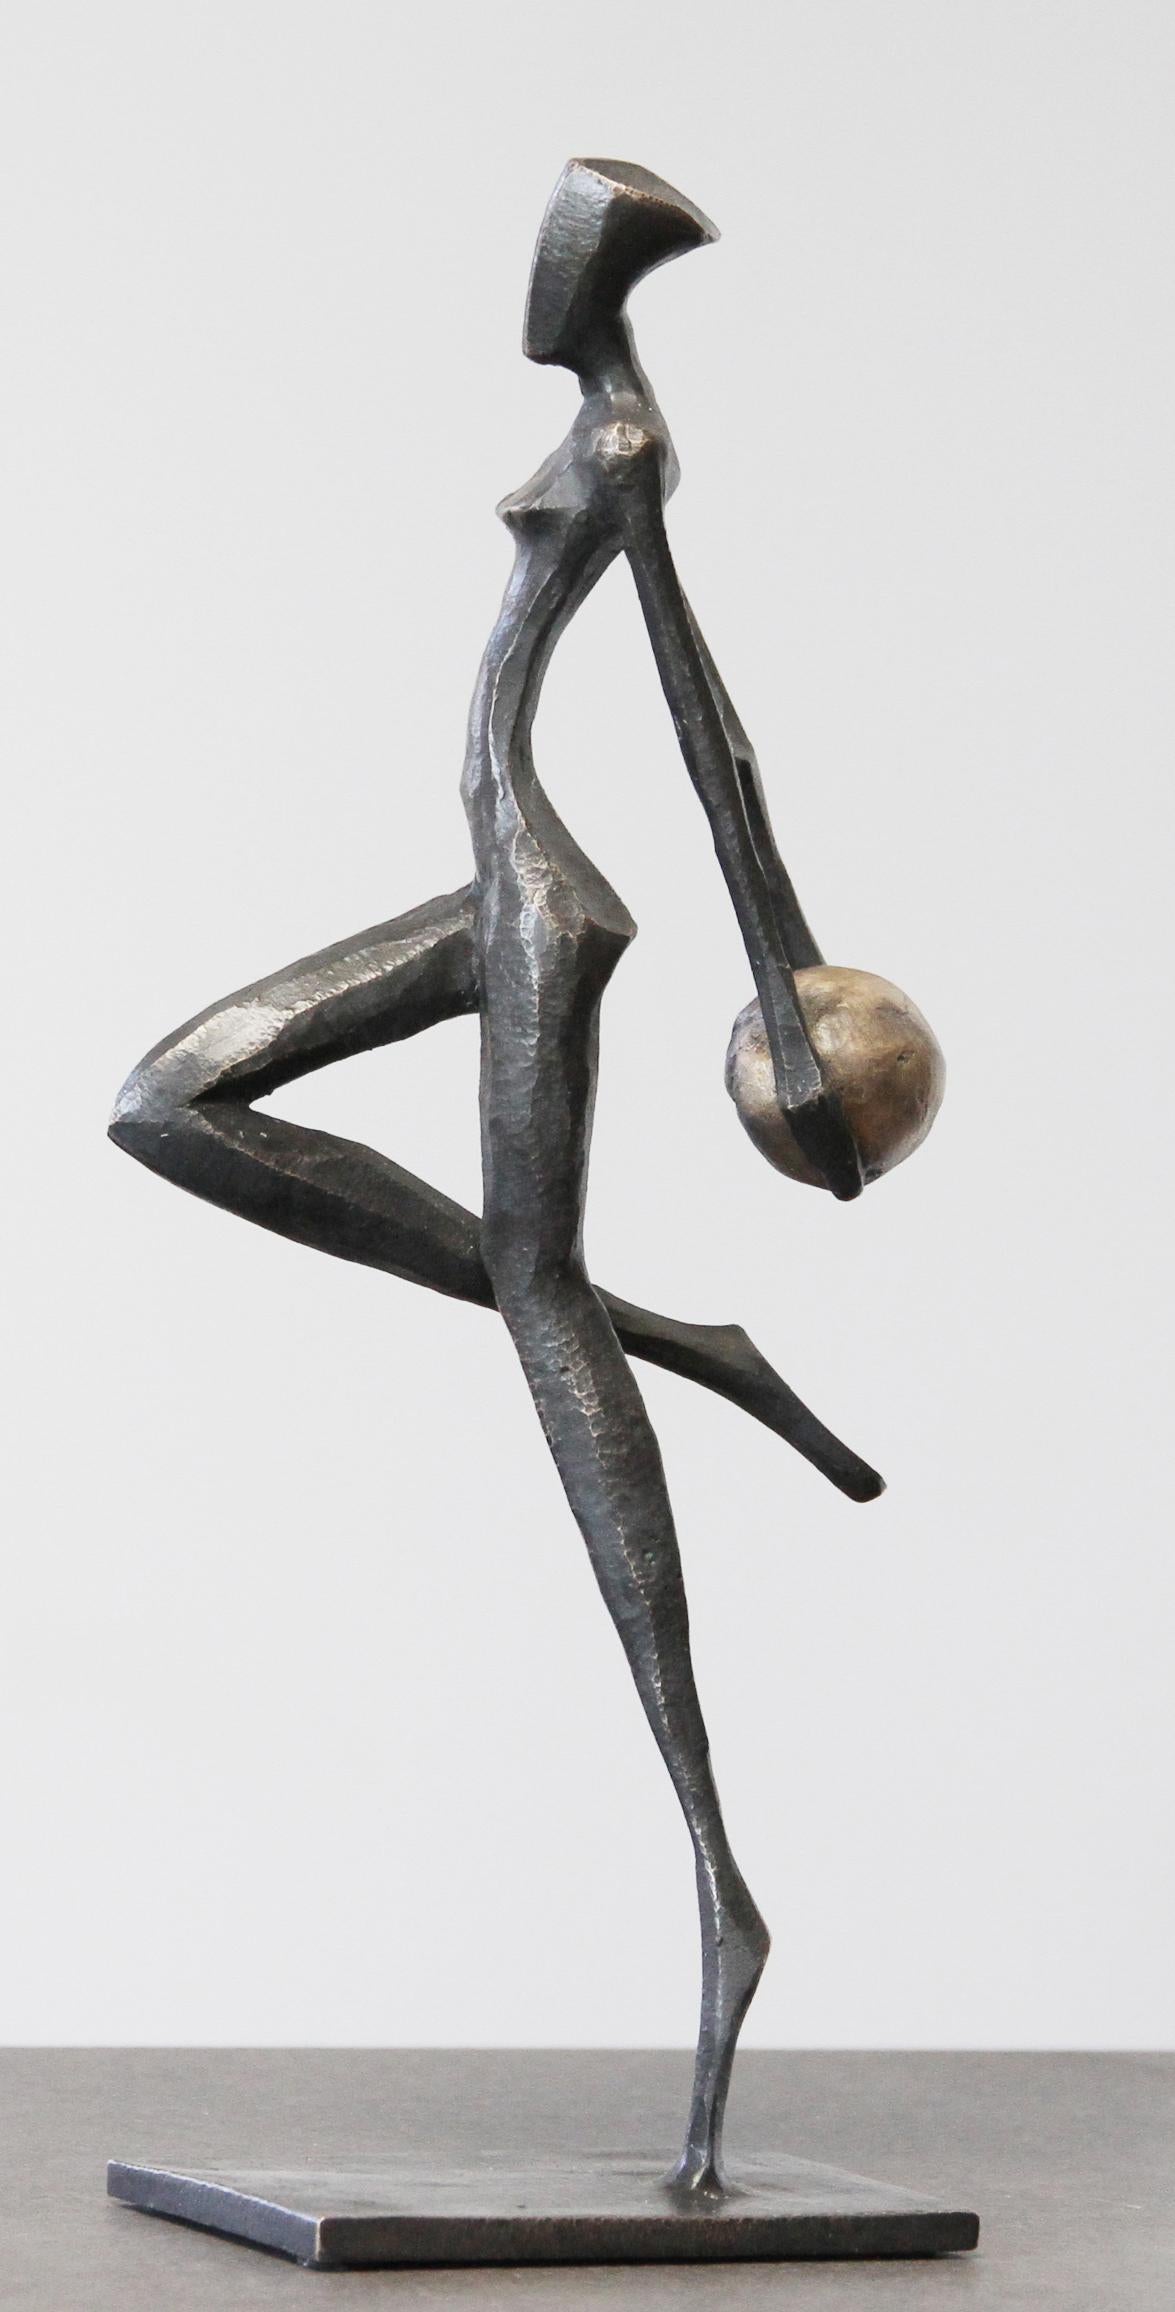 Rhea is an elegant figurative bronze sculpture by Nando Kallweit.

Modelled on modern youthful postures but with a nod to the importance of heritage through the stylised Egyptian-influenced head. A lovely piece on its own or with a group of